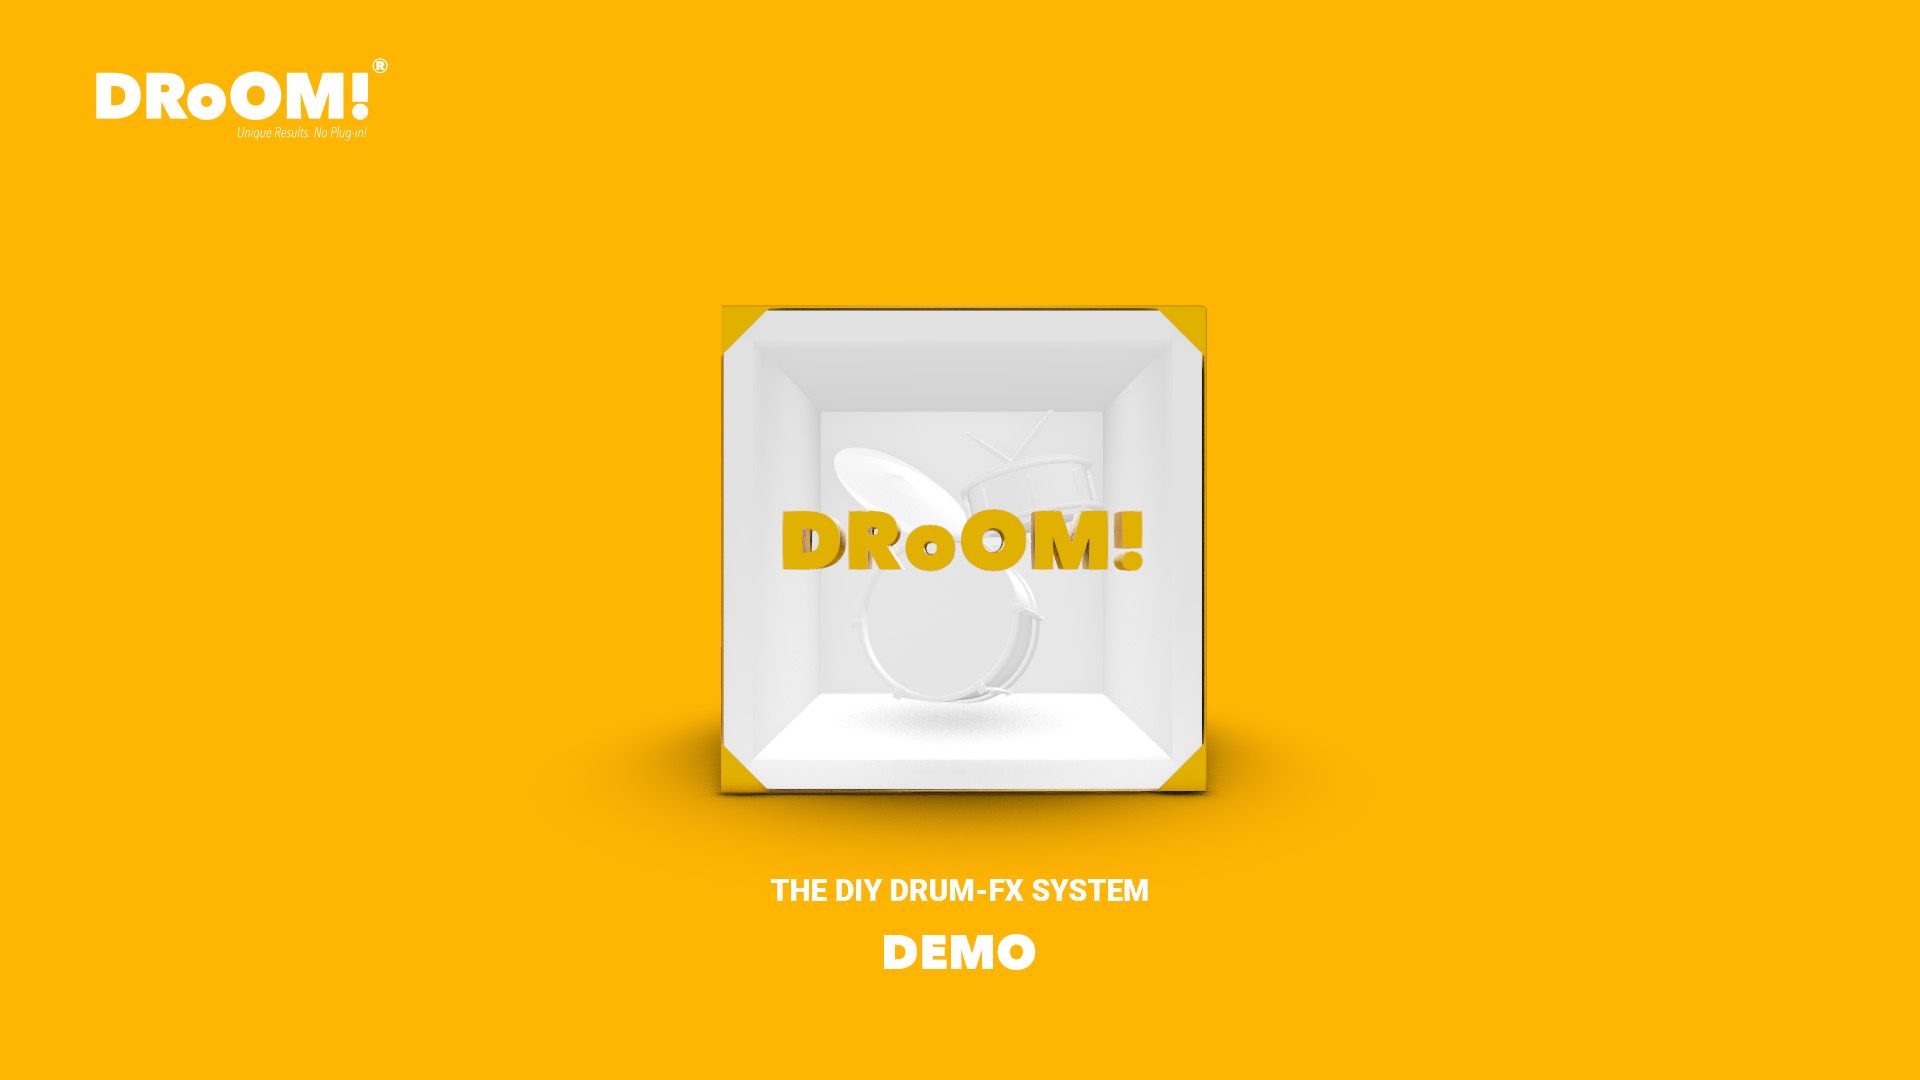 GET YOUR DRoOM! DEMO PACK!